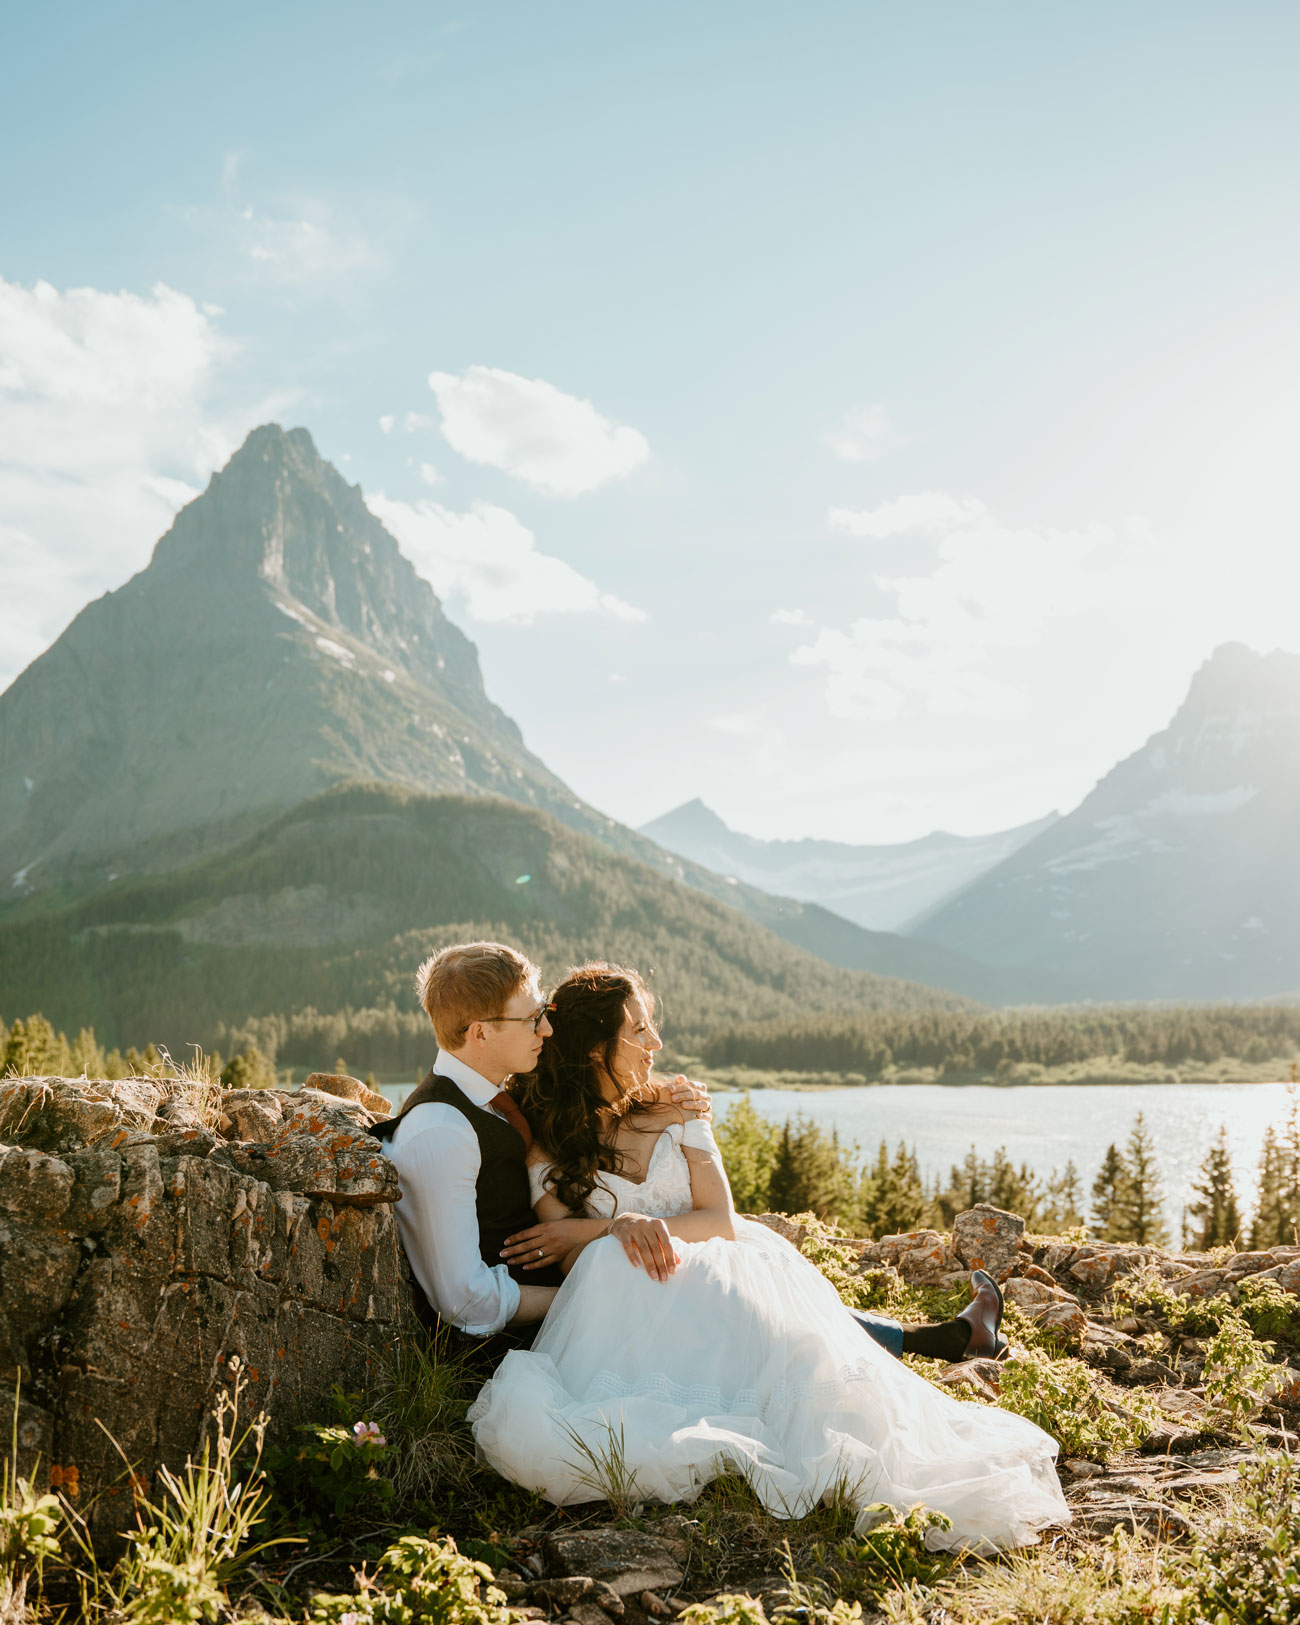 A couple sitting together and looking into the distance after their wedding in Glacier National Park.